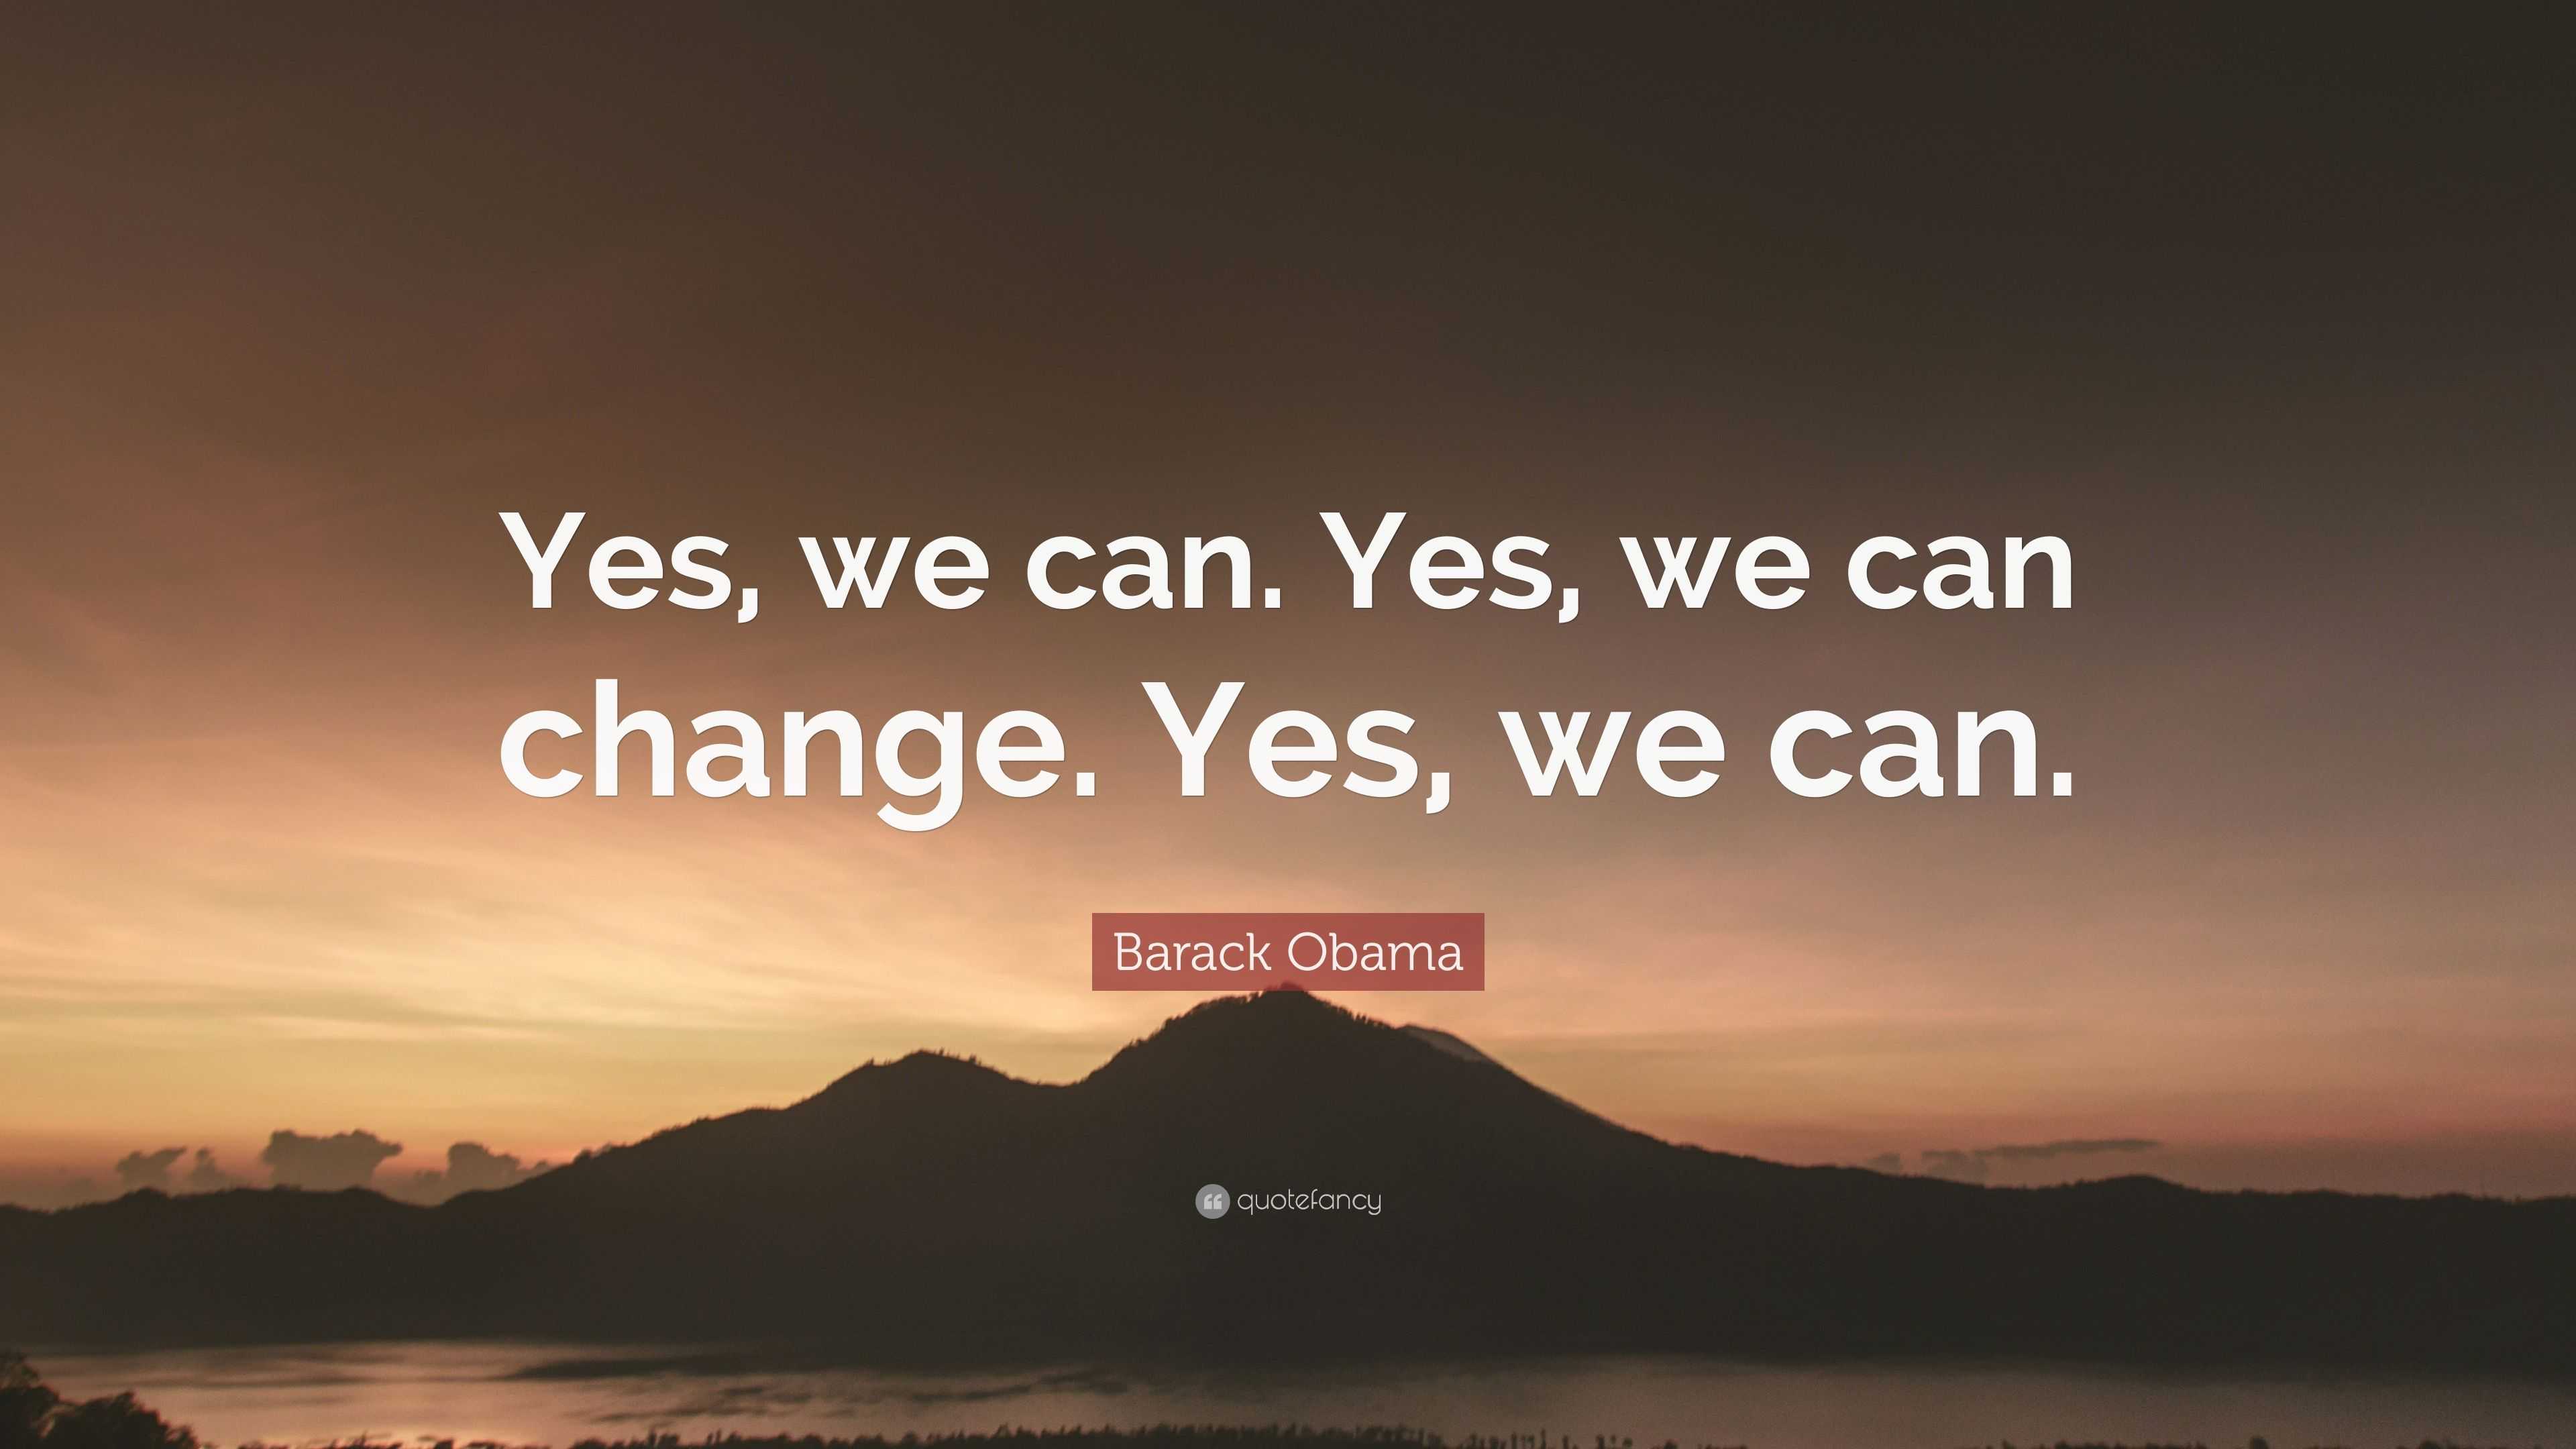 Barack Obama Quote: "Yes, we can. Yes, we can change. Yes, we can." (12 wallpapers) - Quotefancy